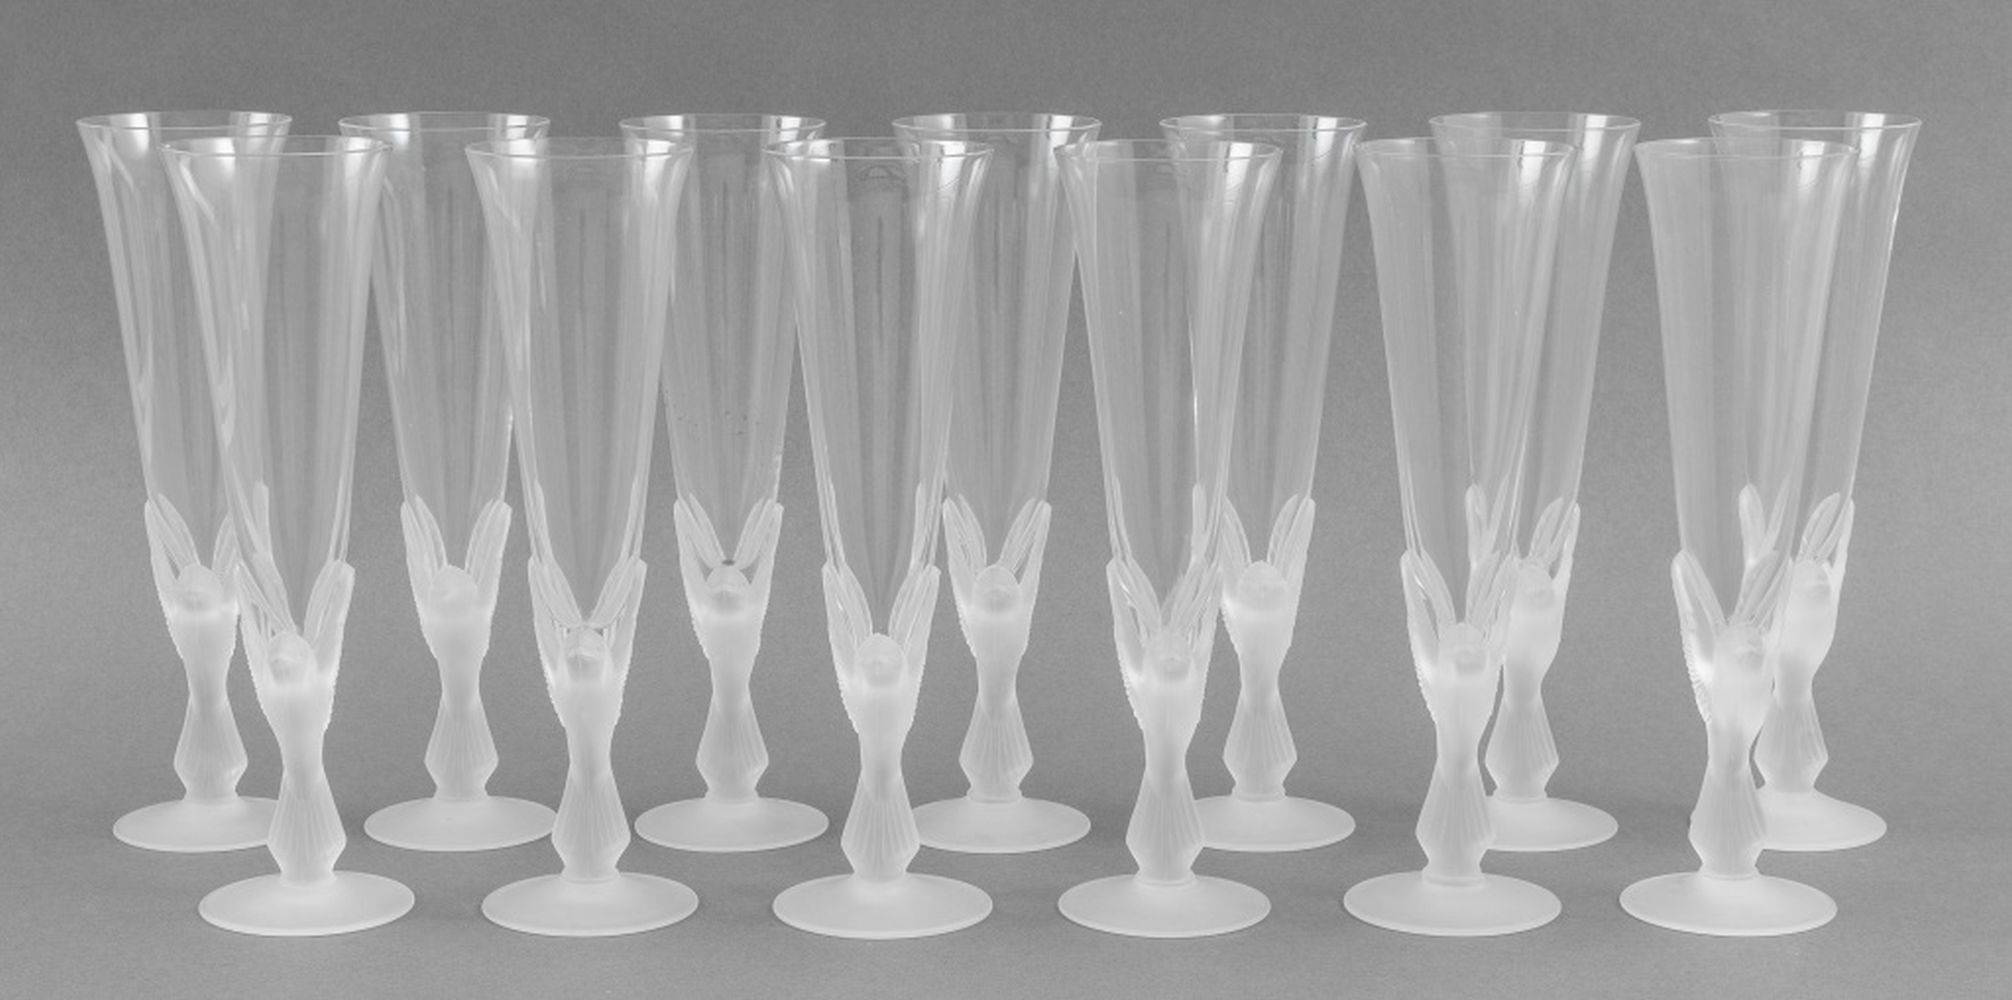 SASAKI "WINGS" FROSTED GLASS CHAMPAGNE